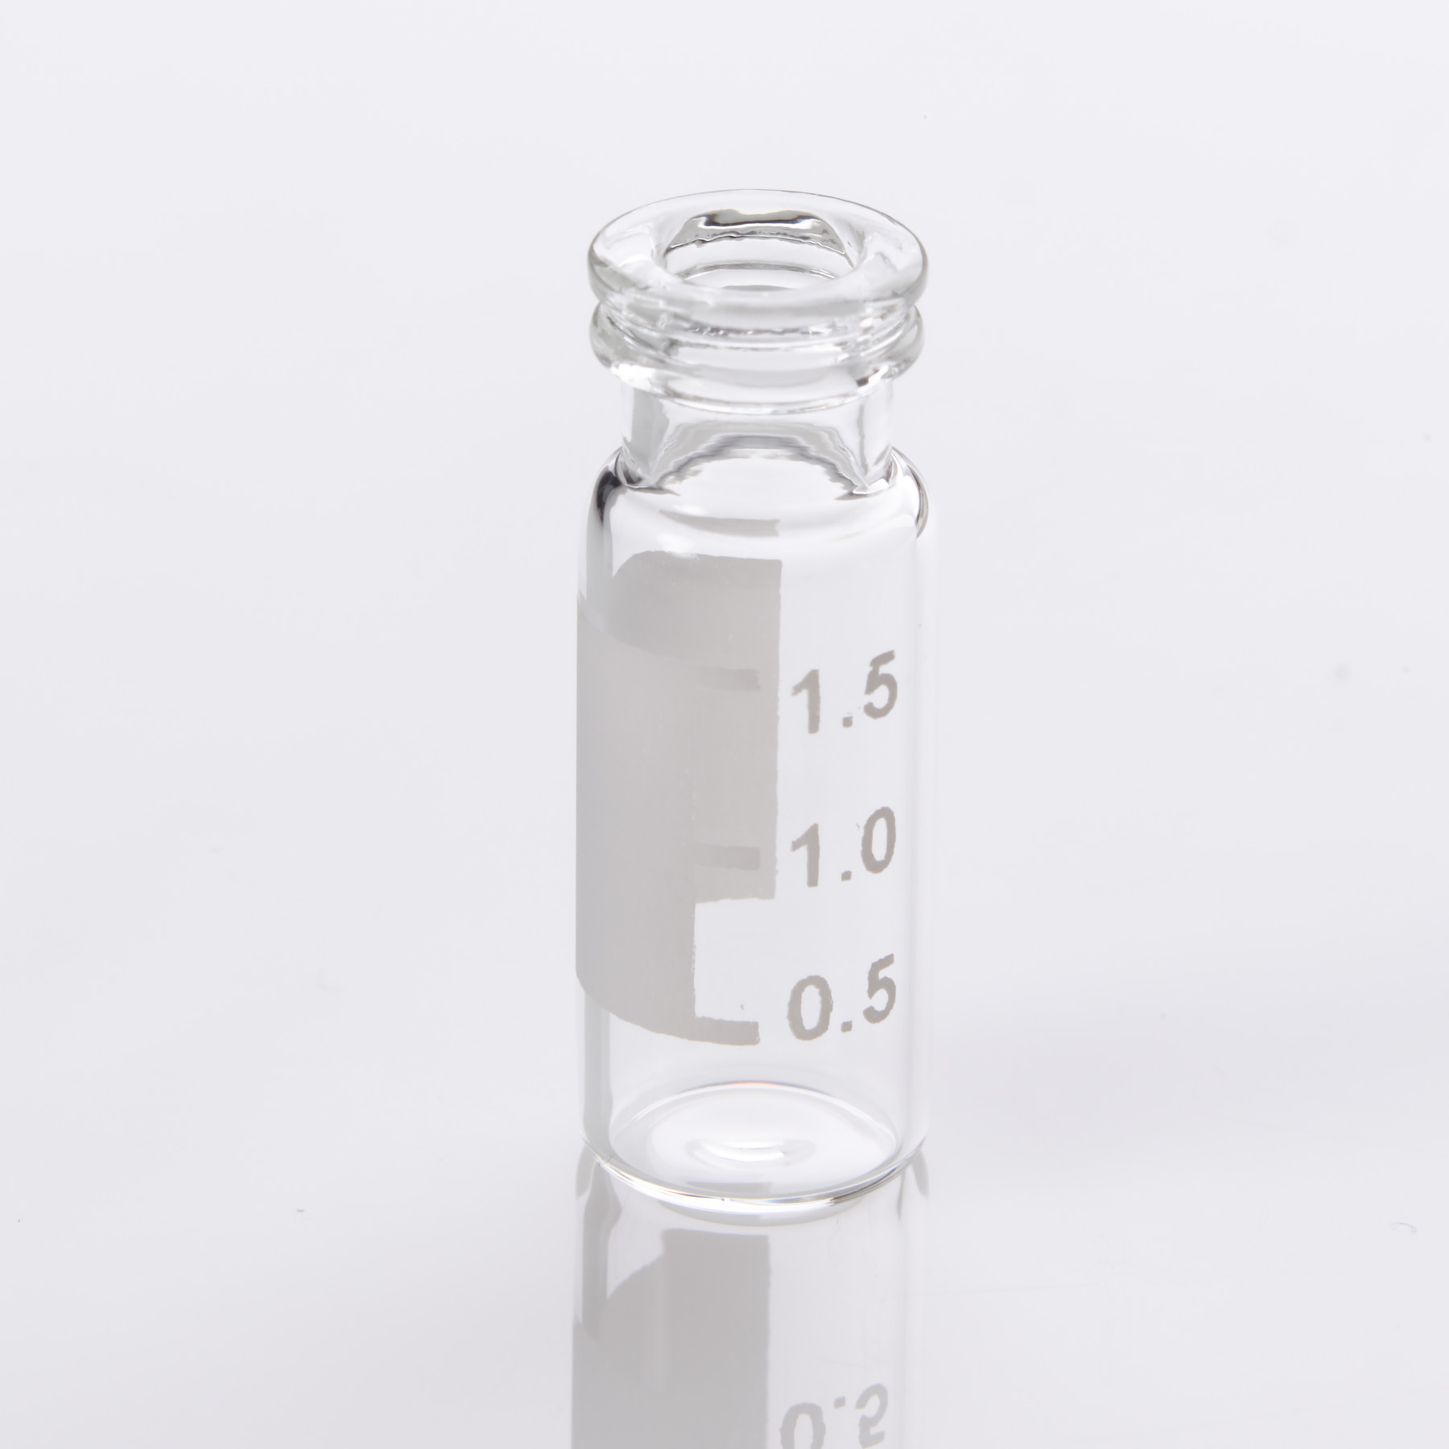 Vial 2mL Clear Glass (12x32mm) with Graduated Marking Spot Wide Mouth 11mm Crimp/Snap Ring LC/MS Certified, 100/pk